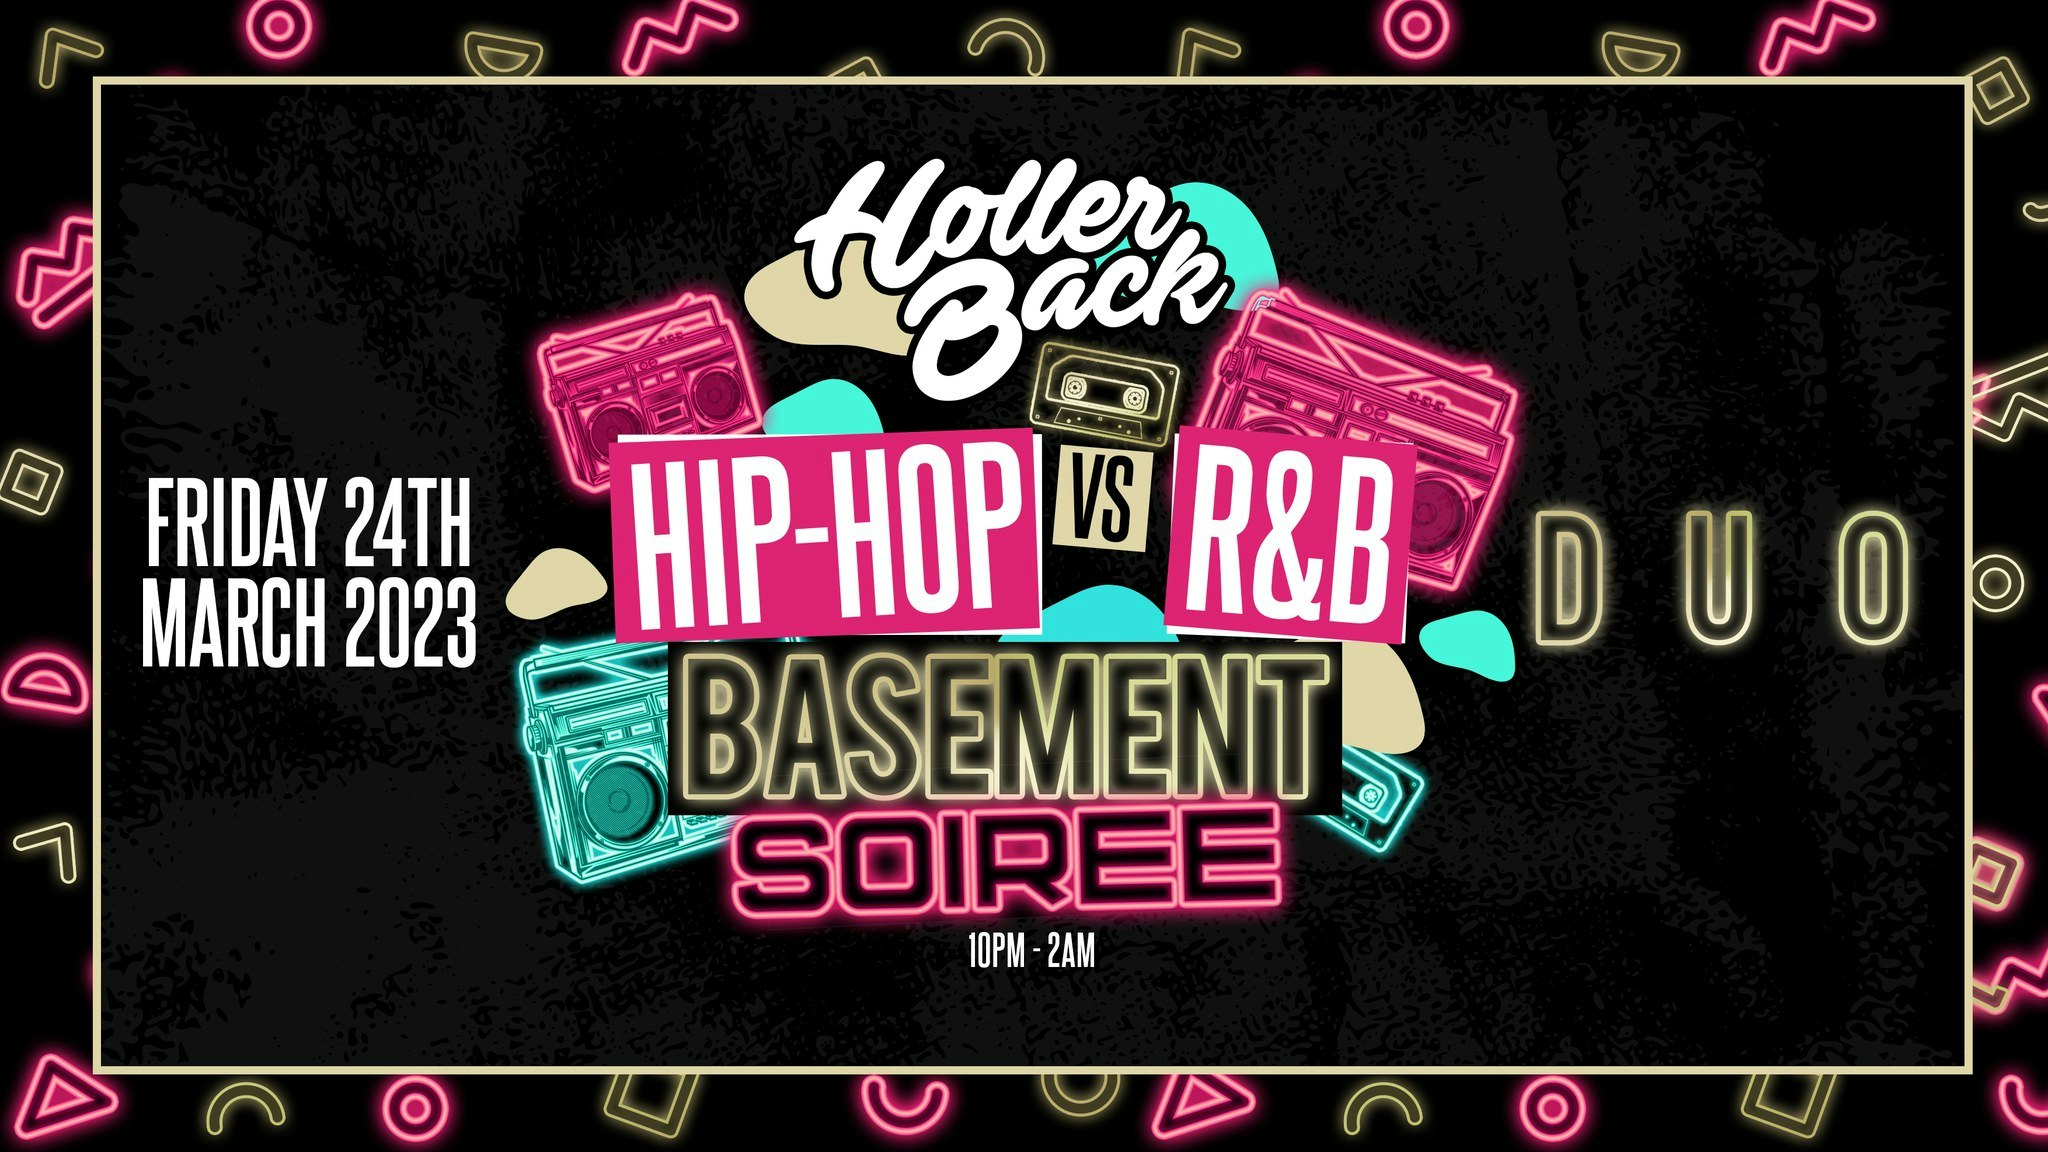 Holler Back – Hiphop & RnB Basement Party at DUO Camden